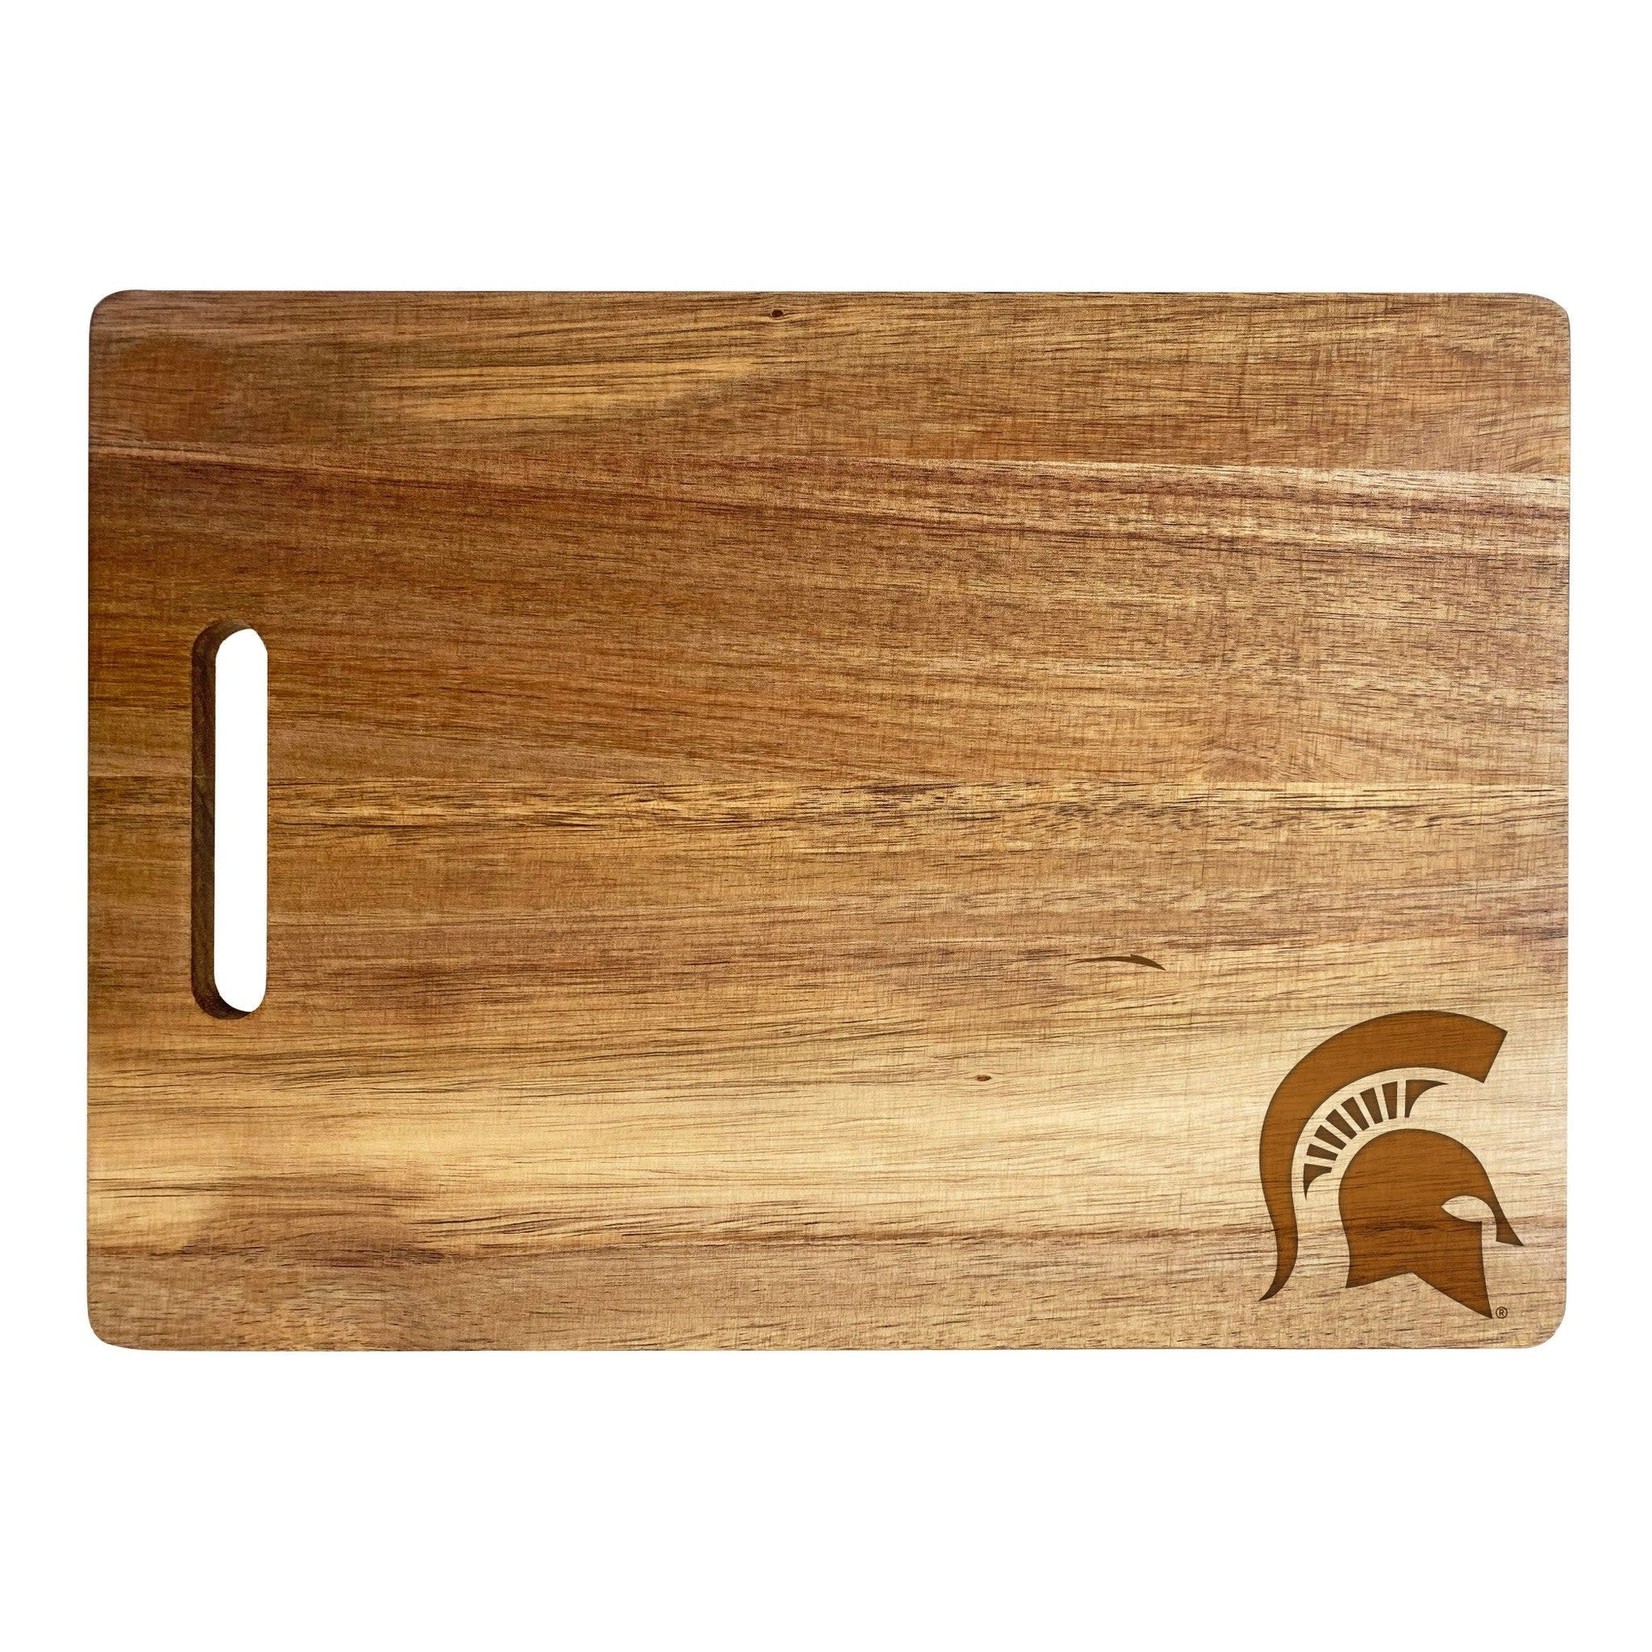 R & R NCAA Michigan State Spartans Engraved Wooden Cutting Board 10" x 14" Acacia Wood